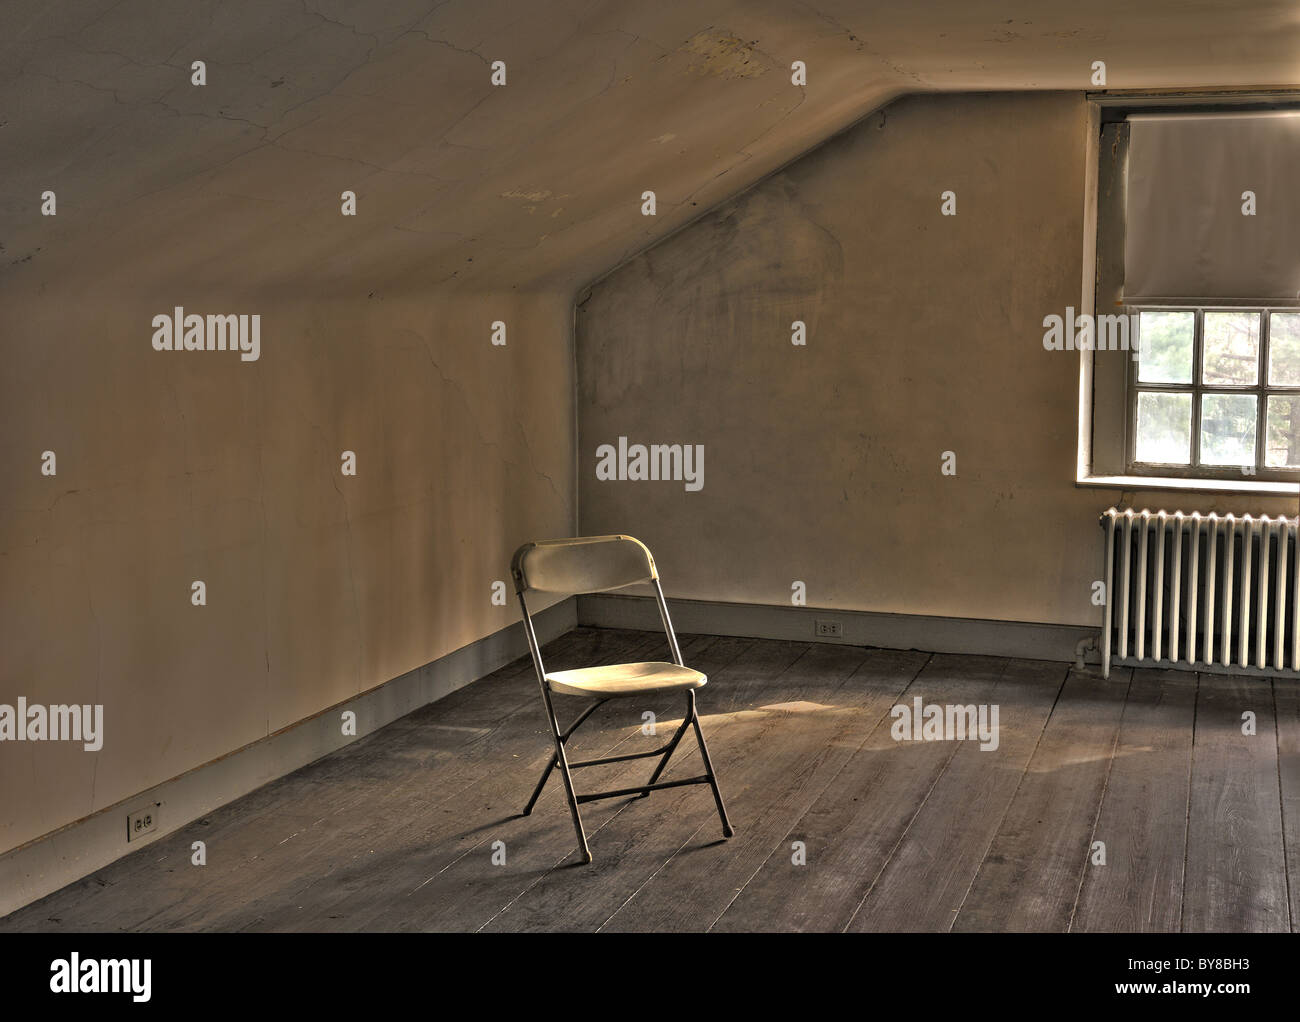 Lone Chair Sitting In Neglected Empty Room Stock Photo